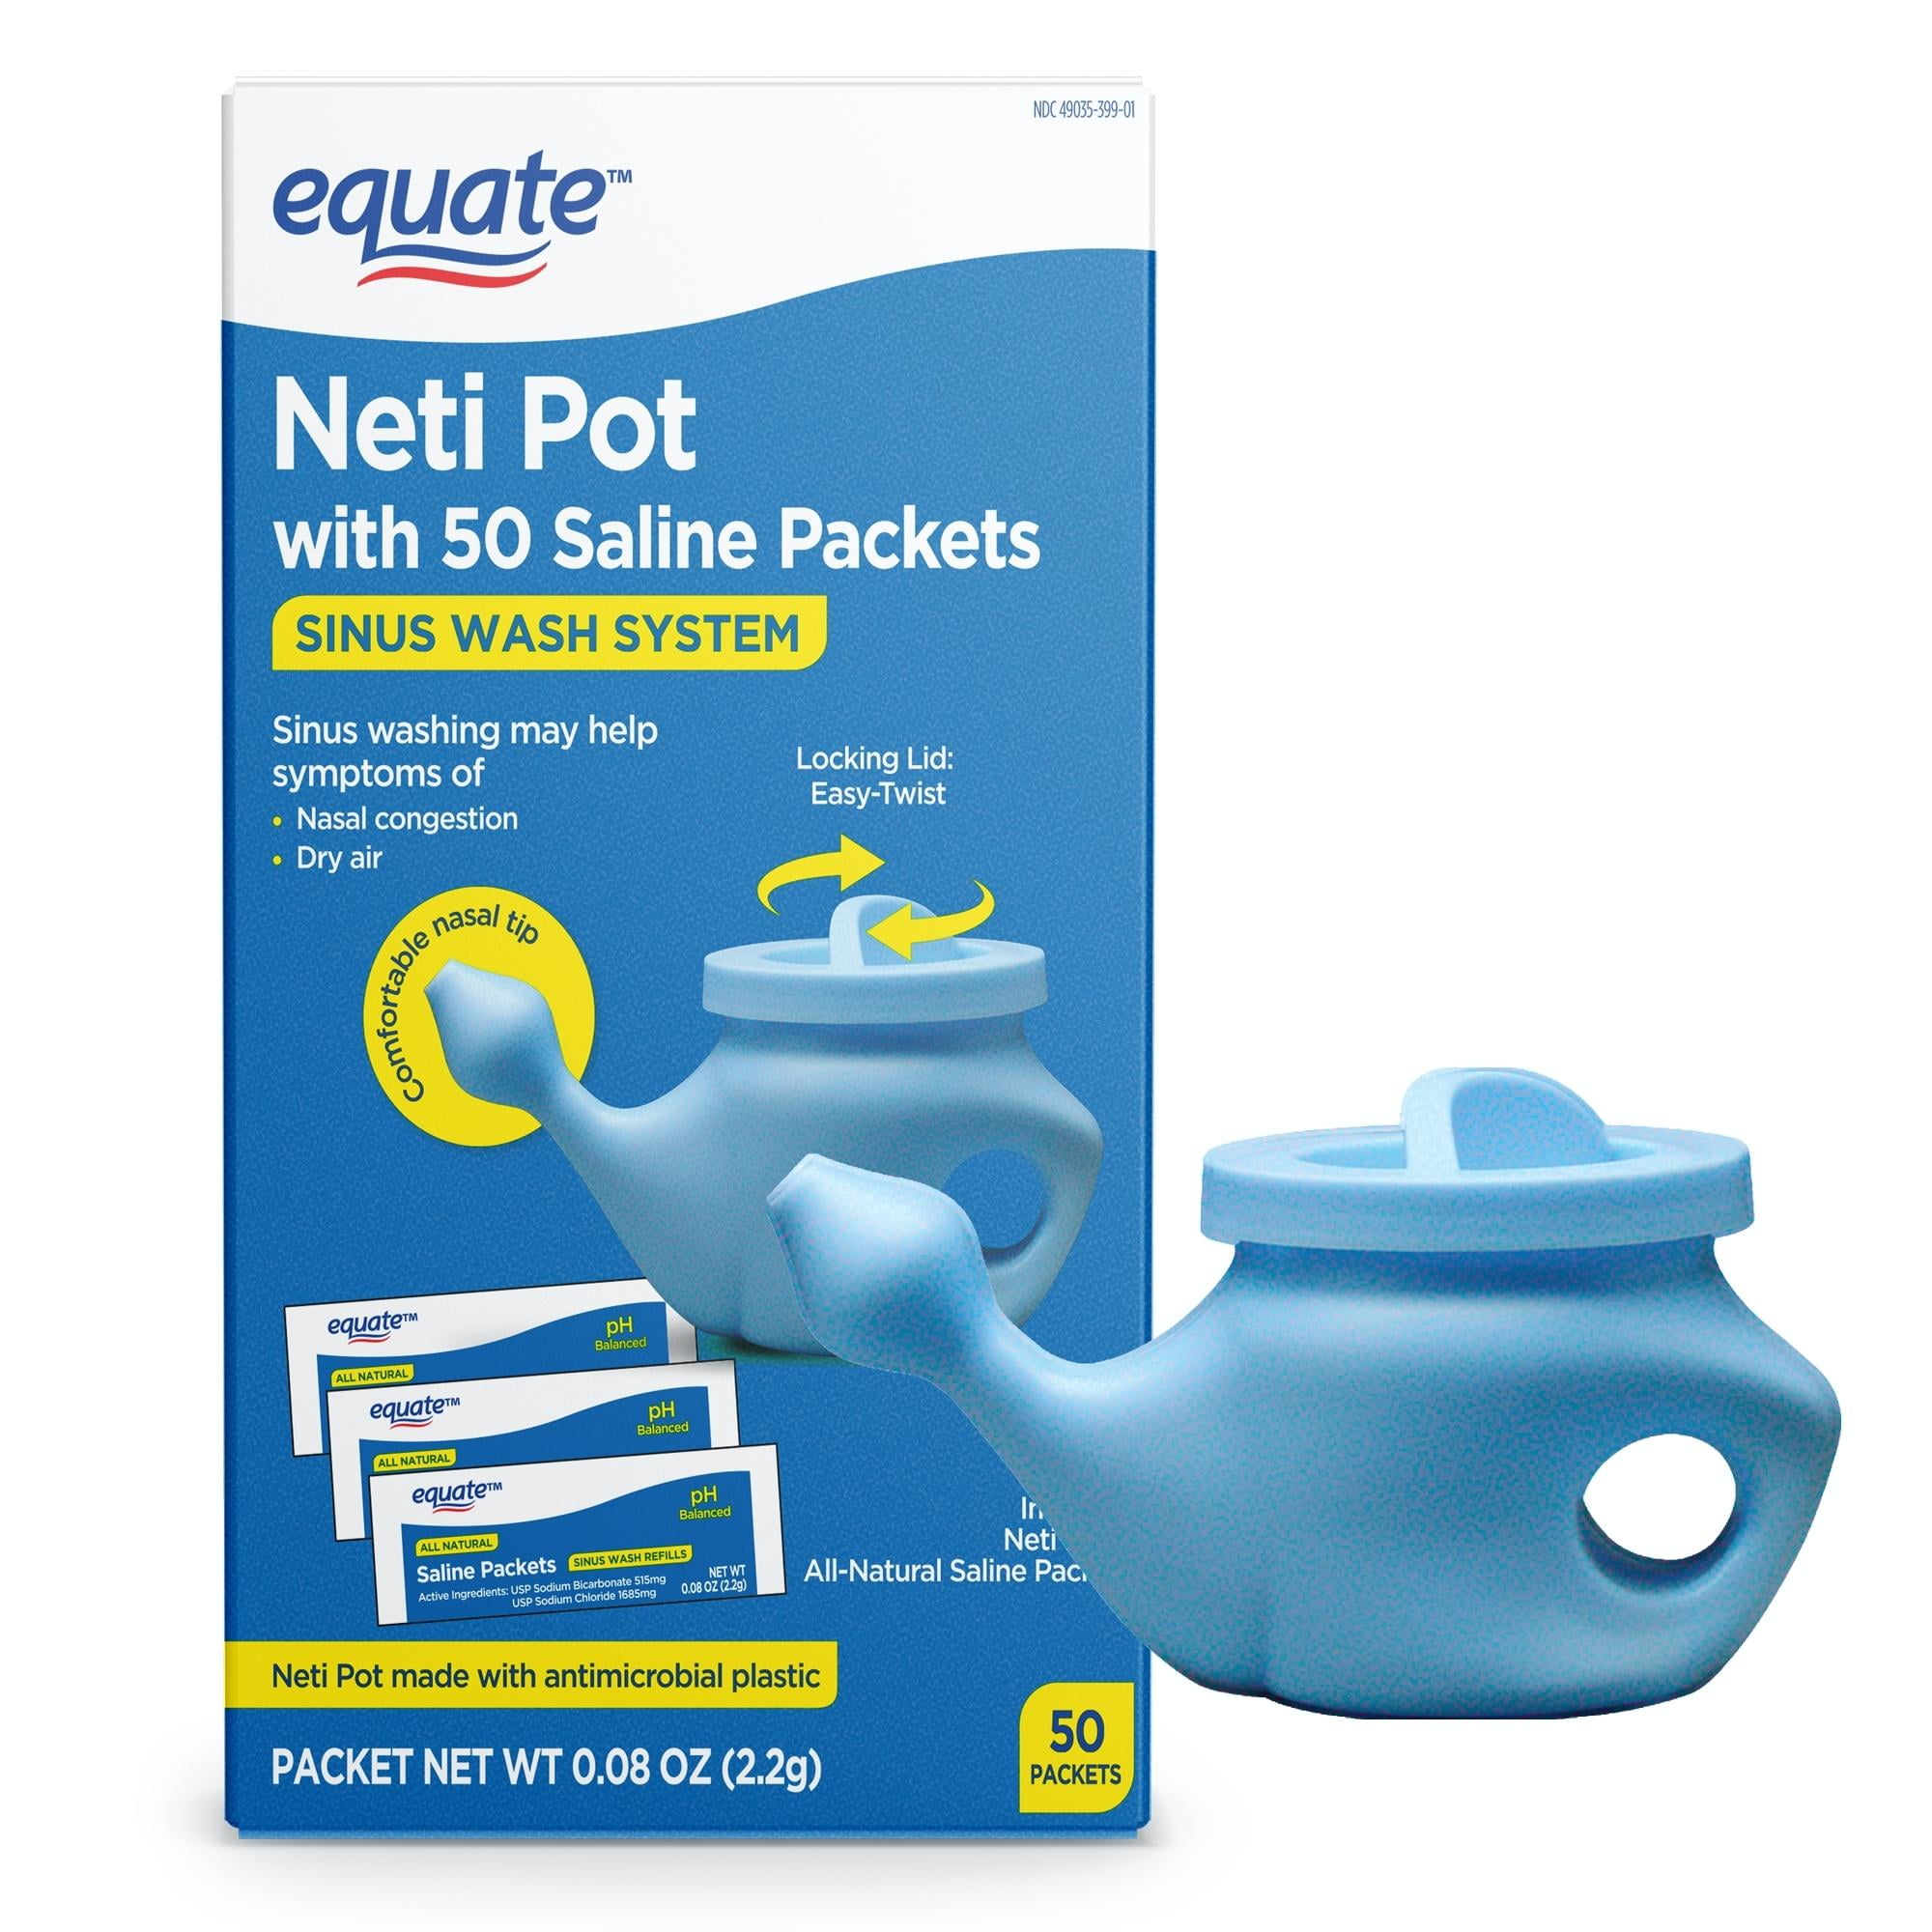 Equate Neti Pot, with Saline Packets - 50 packets, 0.08 oz